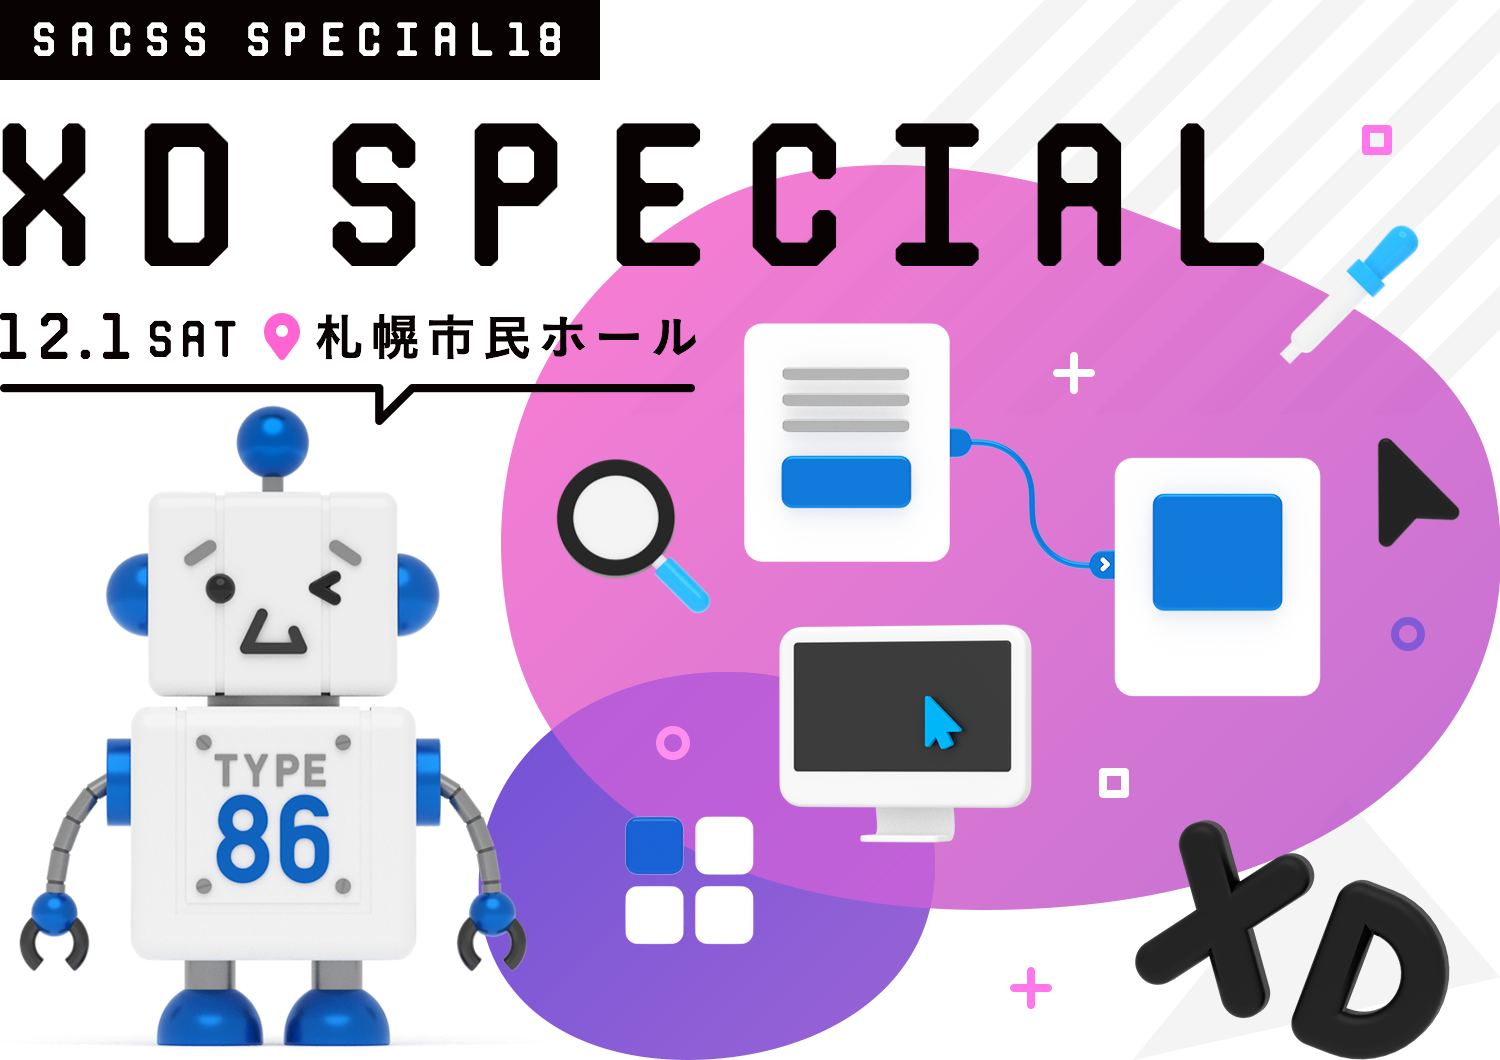 SaCSS 2018年12月1日『SaCSS Special18 : XD SPECIAL』